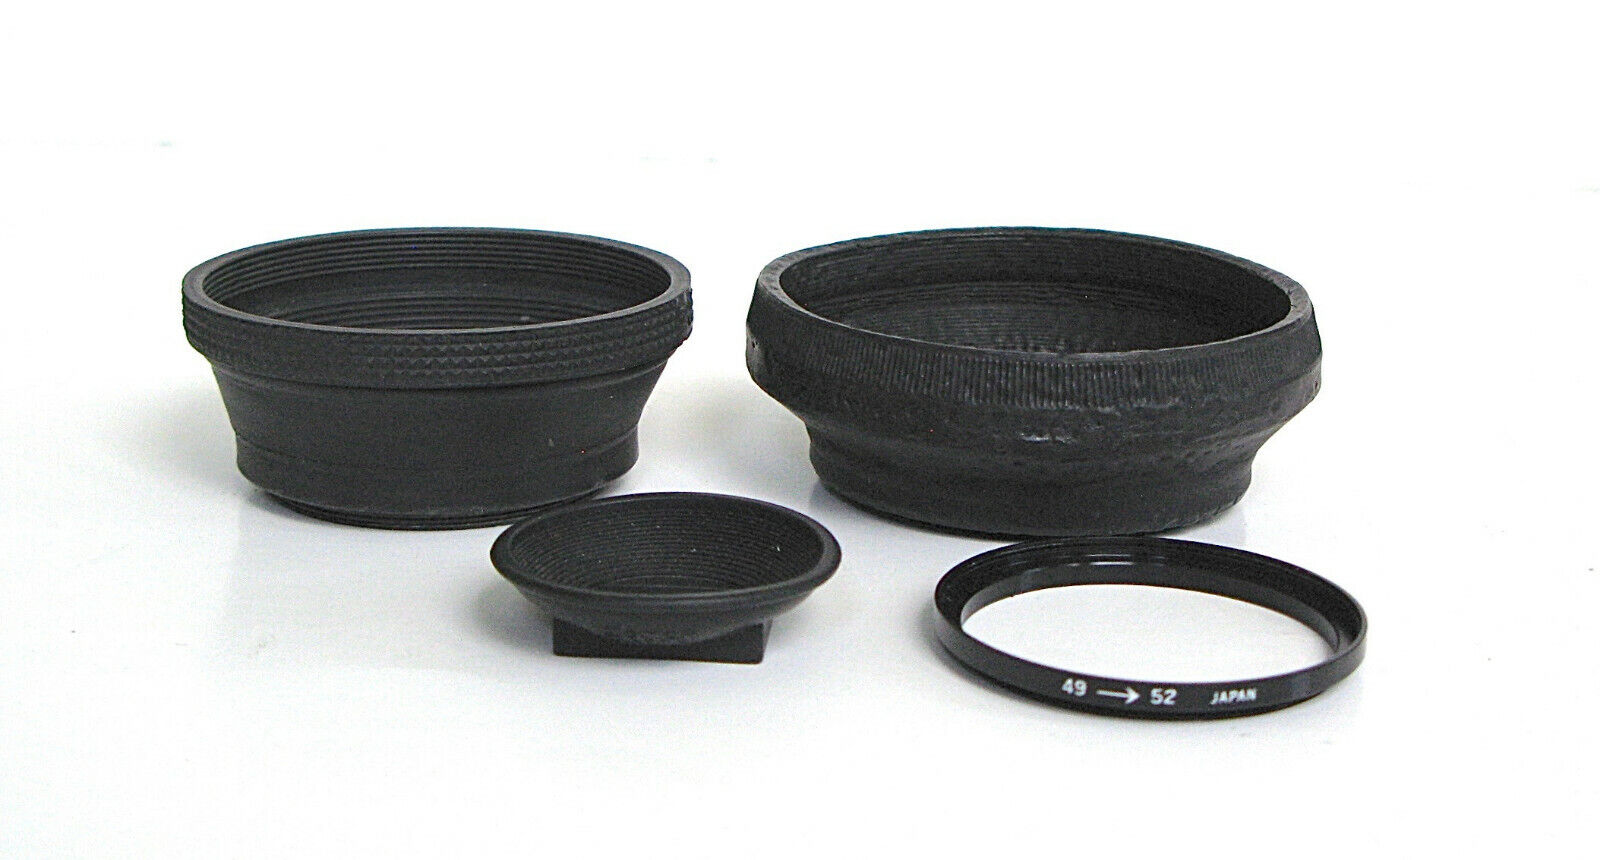 Canon 35mm Camera Eyecup, 49-52 Step-Up Ring, 52mm & 58mm Lens Hoods Canon, Unbranded - фотография #3